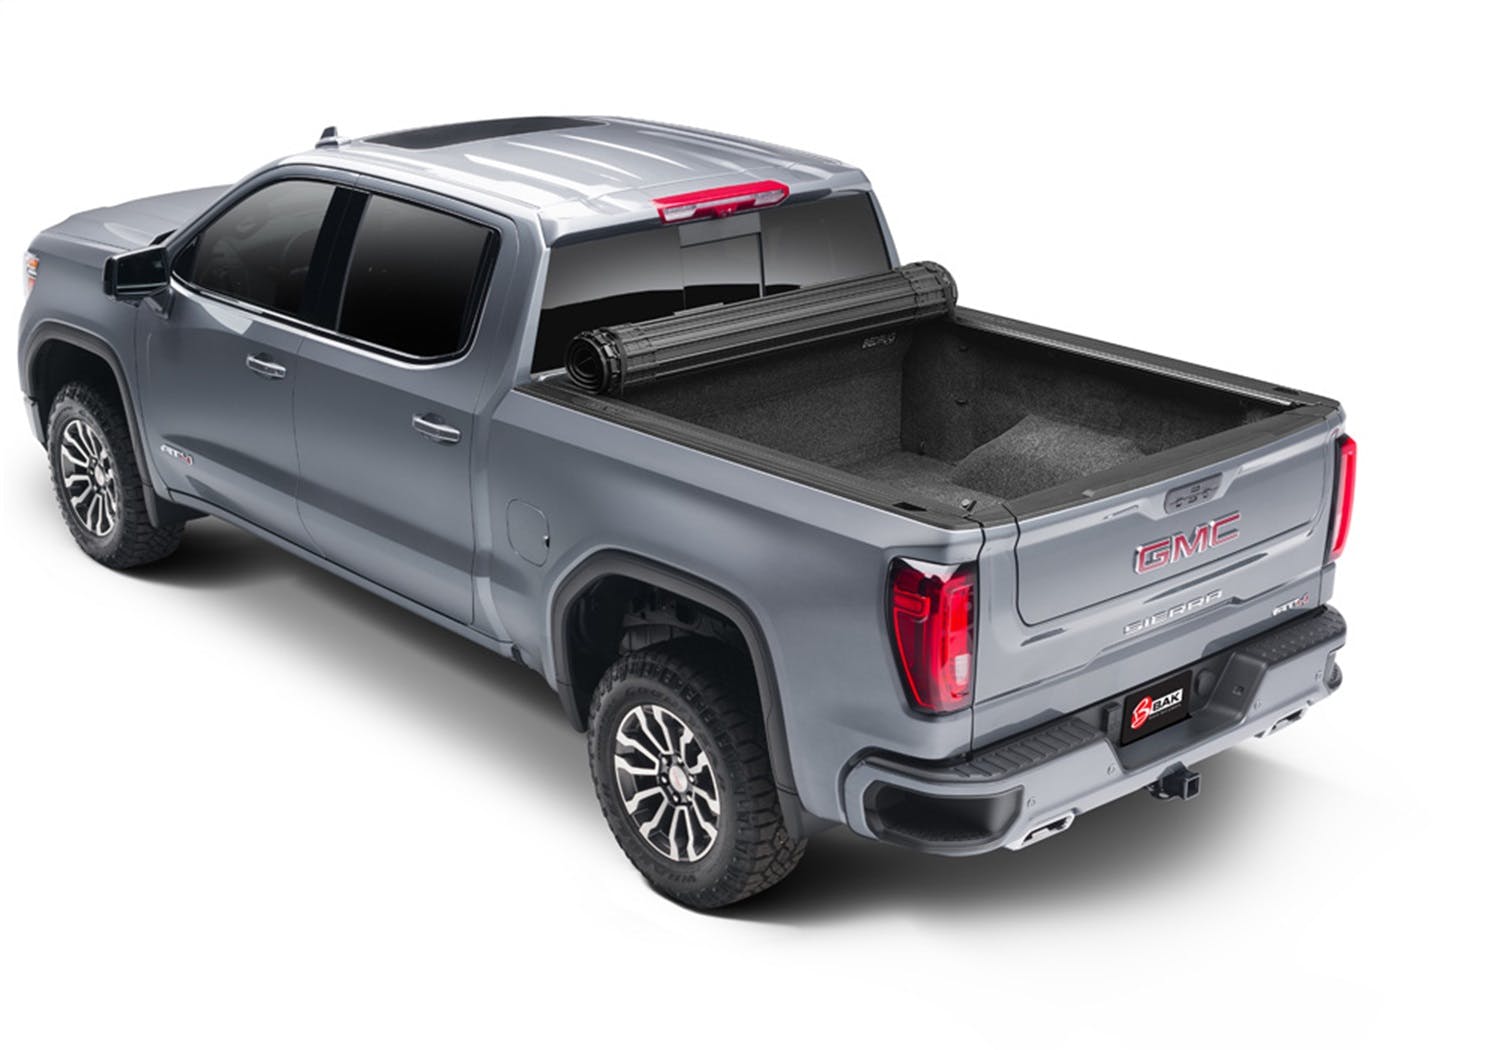 BAK Industries 80120 Revolver X4s Hard Rolling Truck Bed Cover